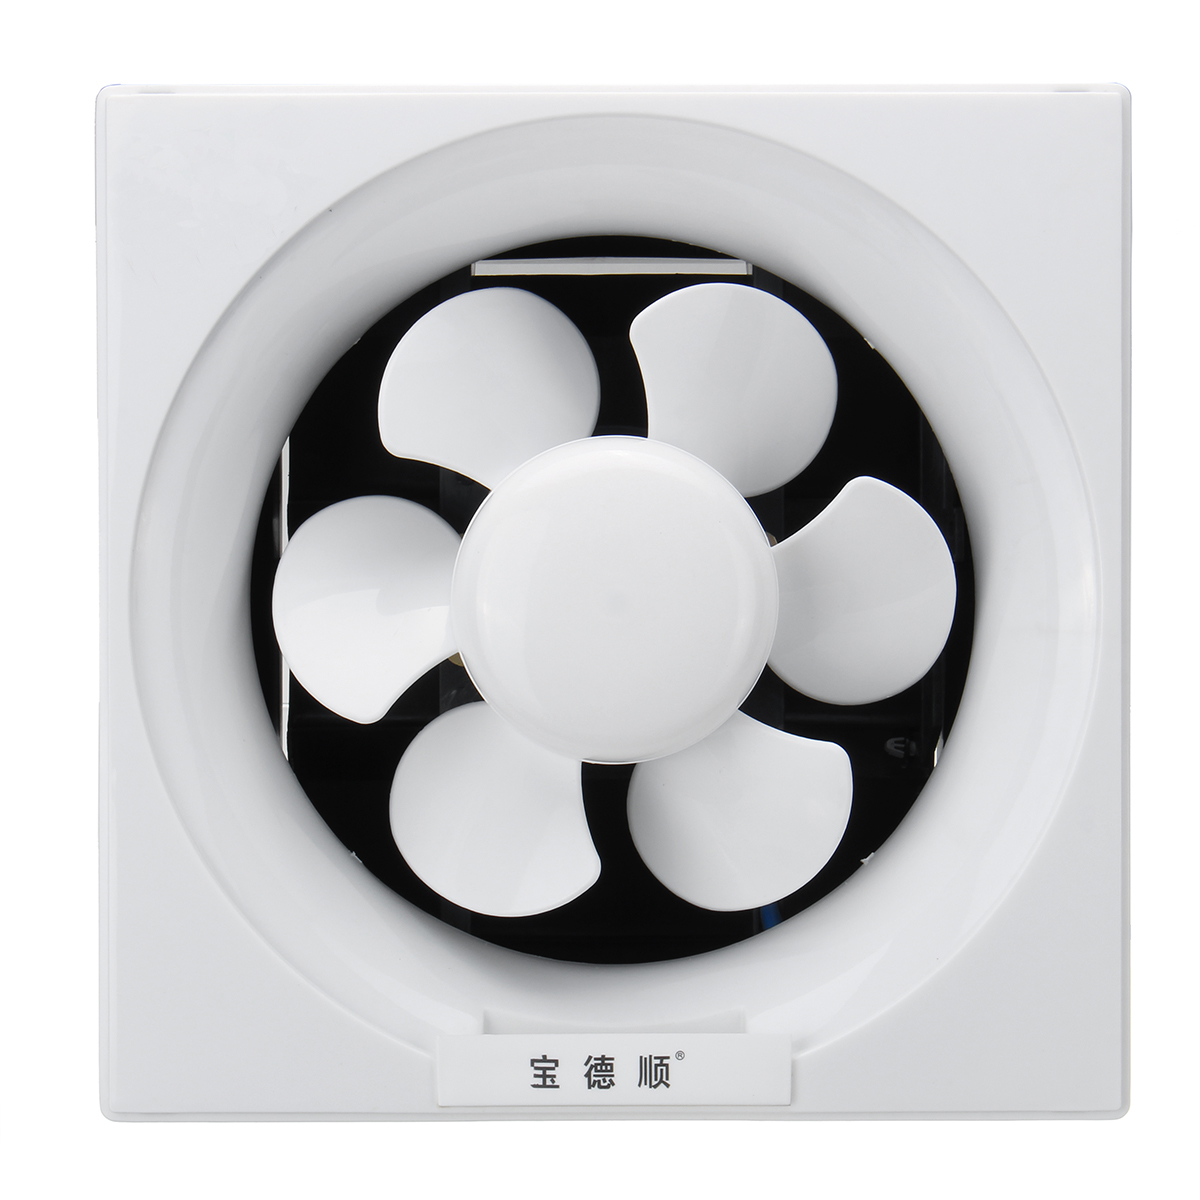 Powerful-Low-Noise-Ventilation-Extractor-Exhaust-Fan-Shutter-for-Bathroo-1348667